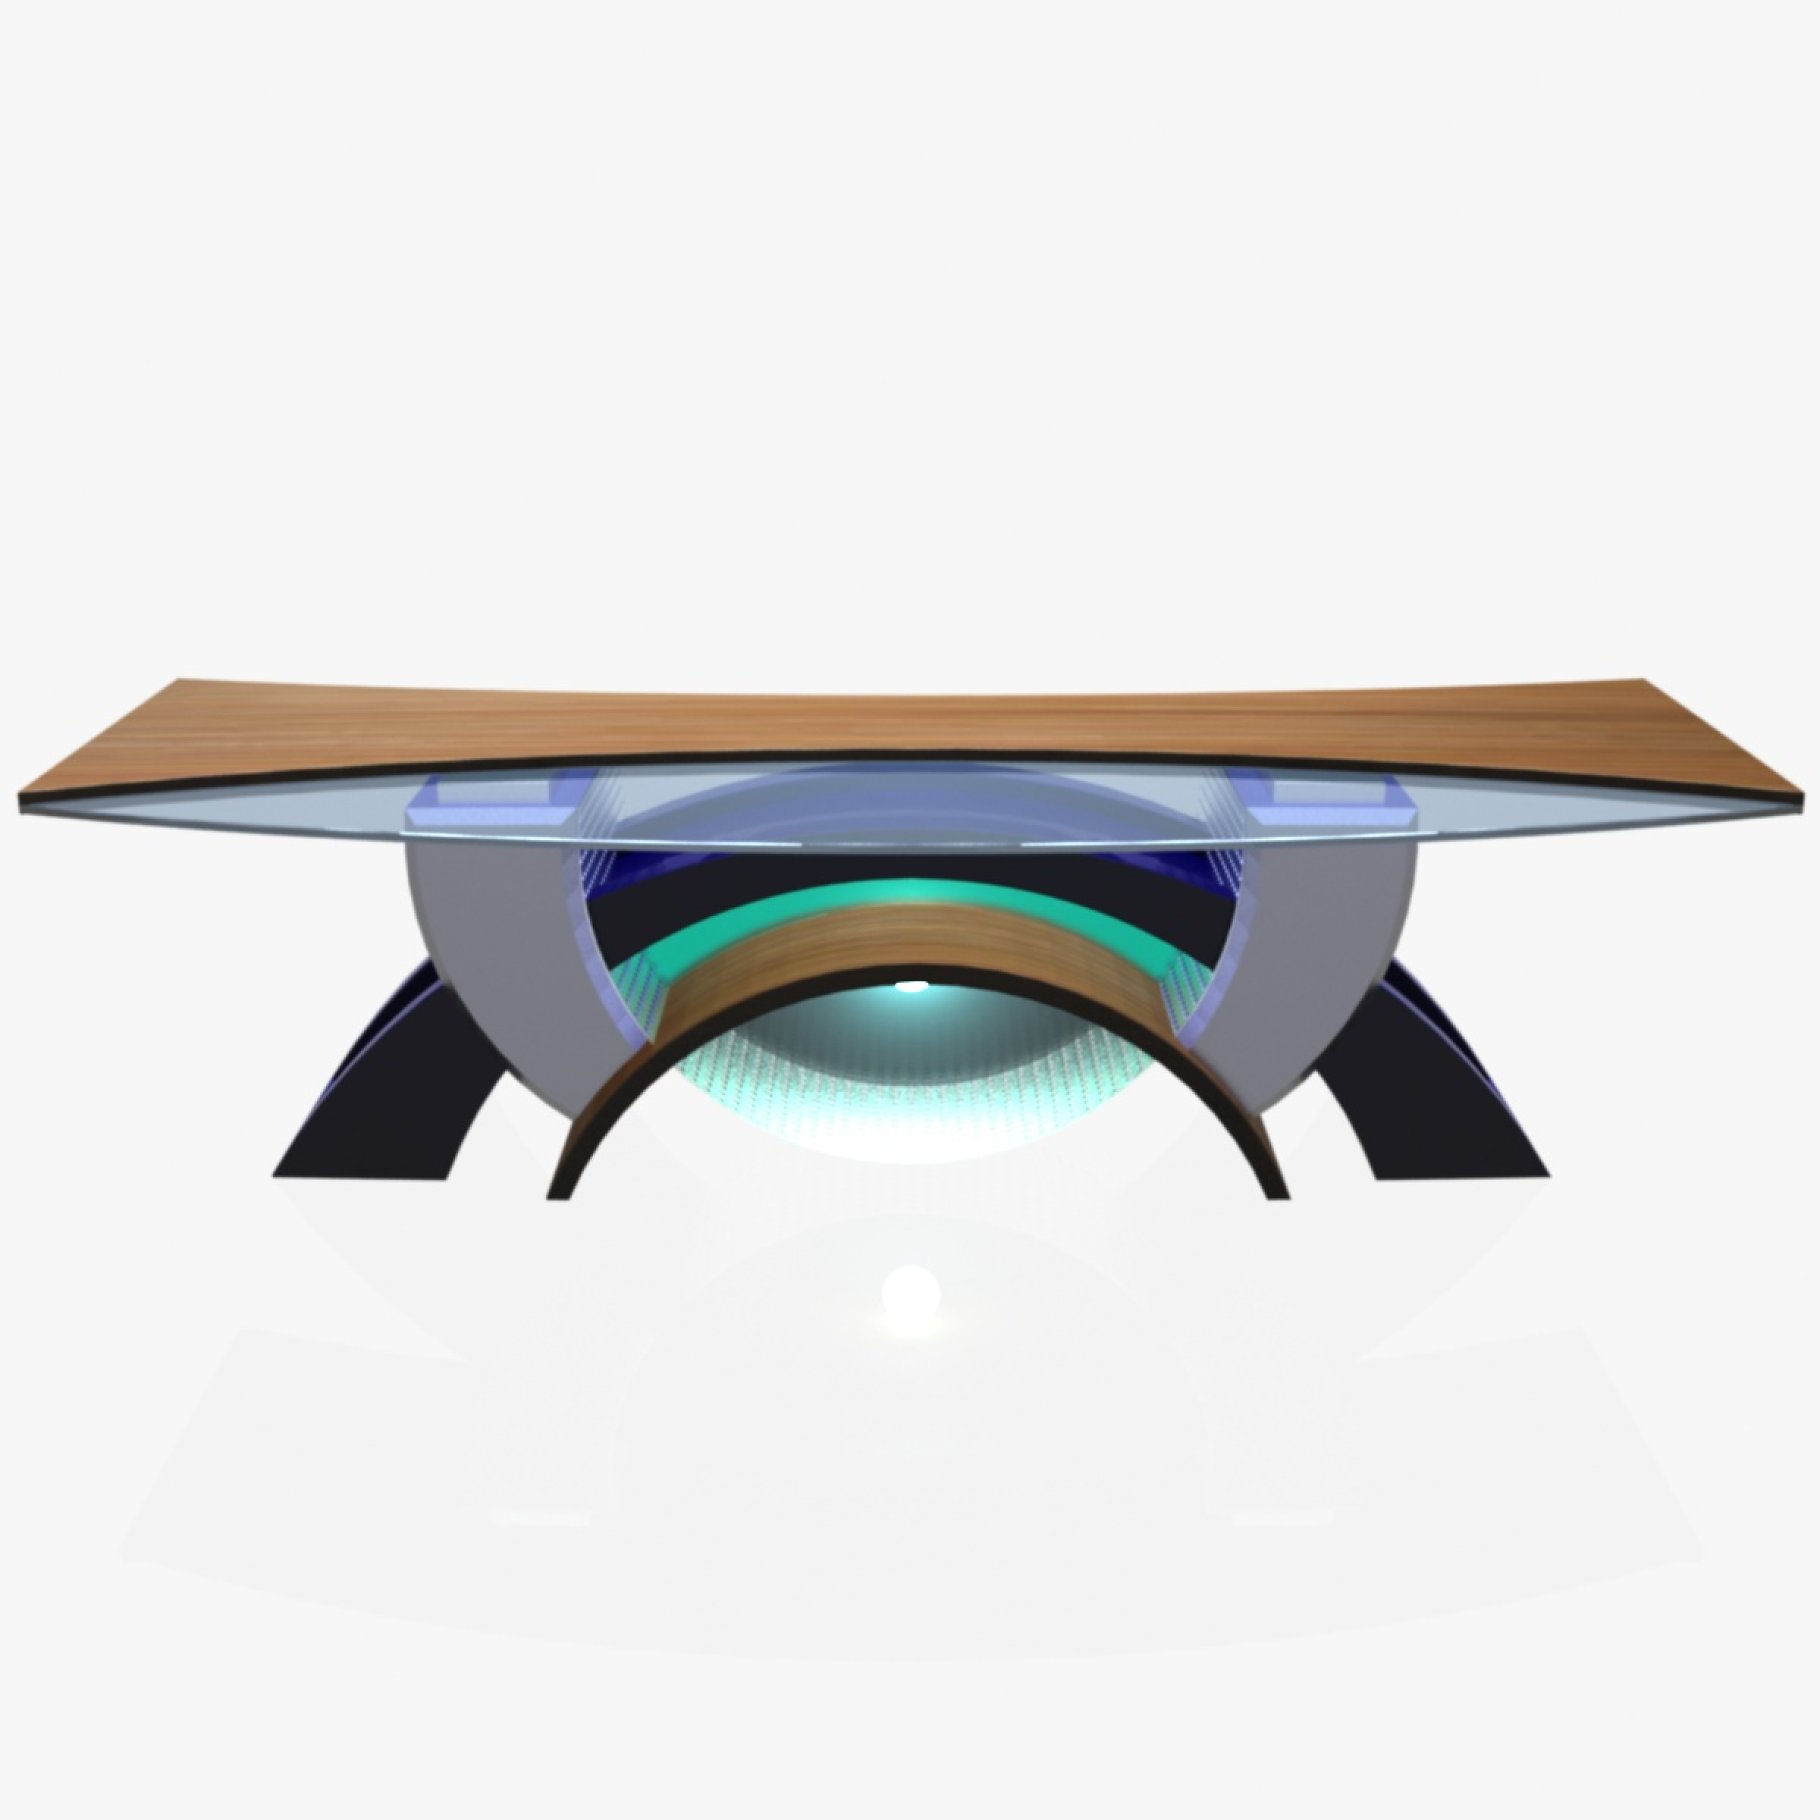 Wonderful tables with glass.